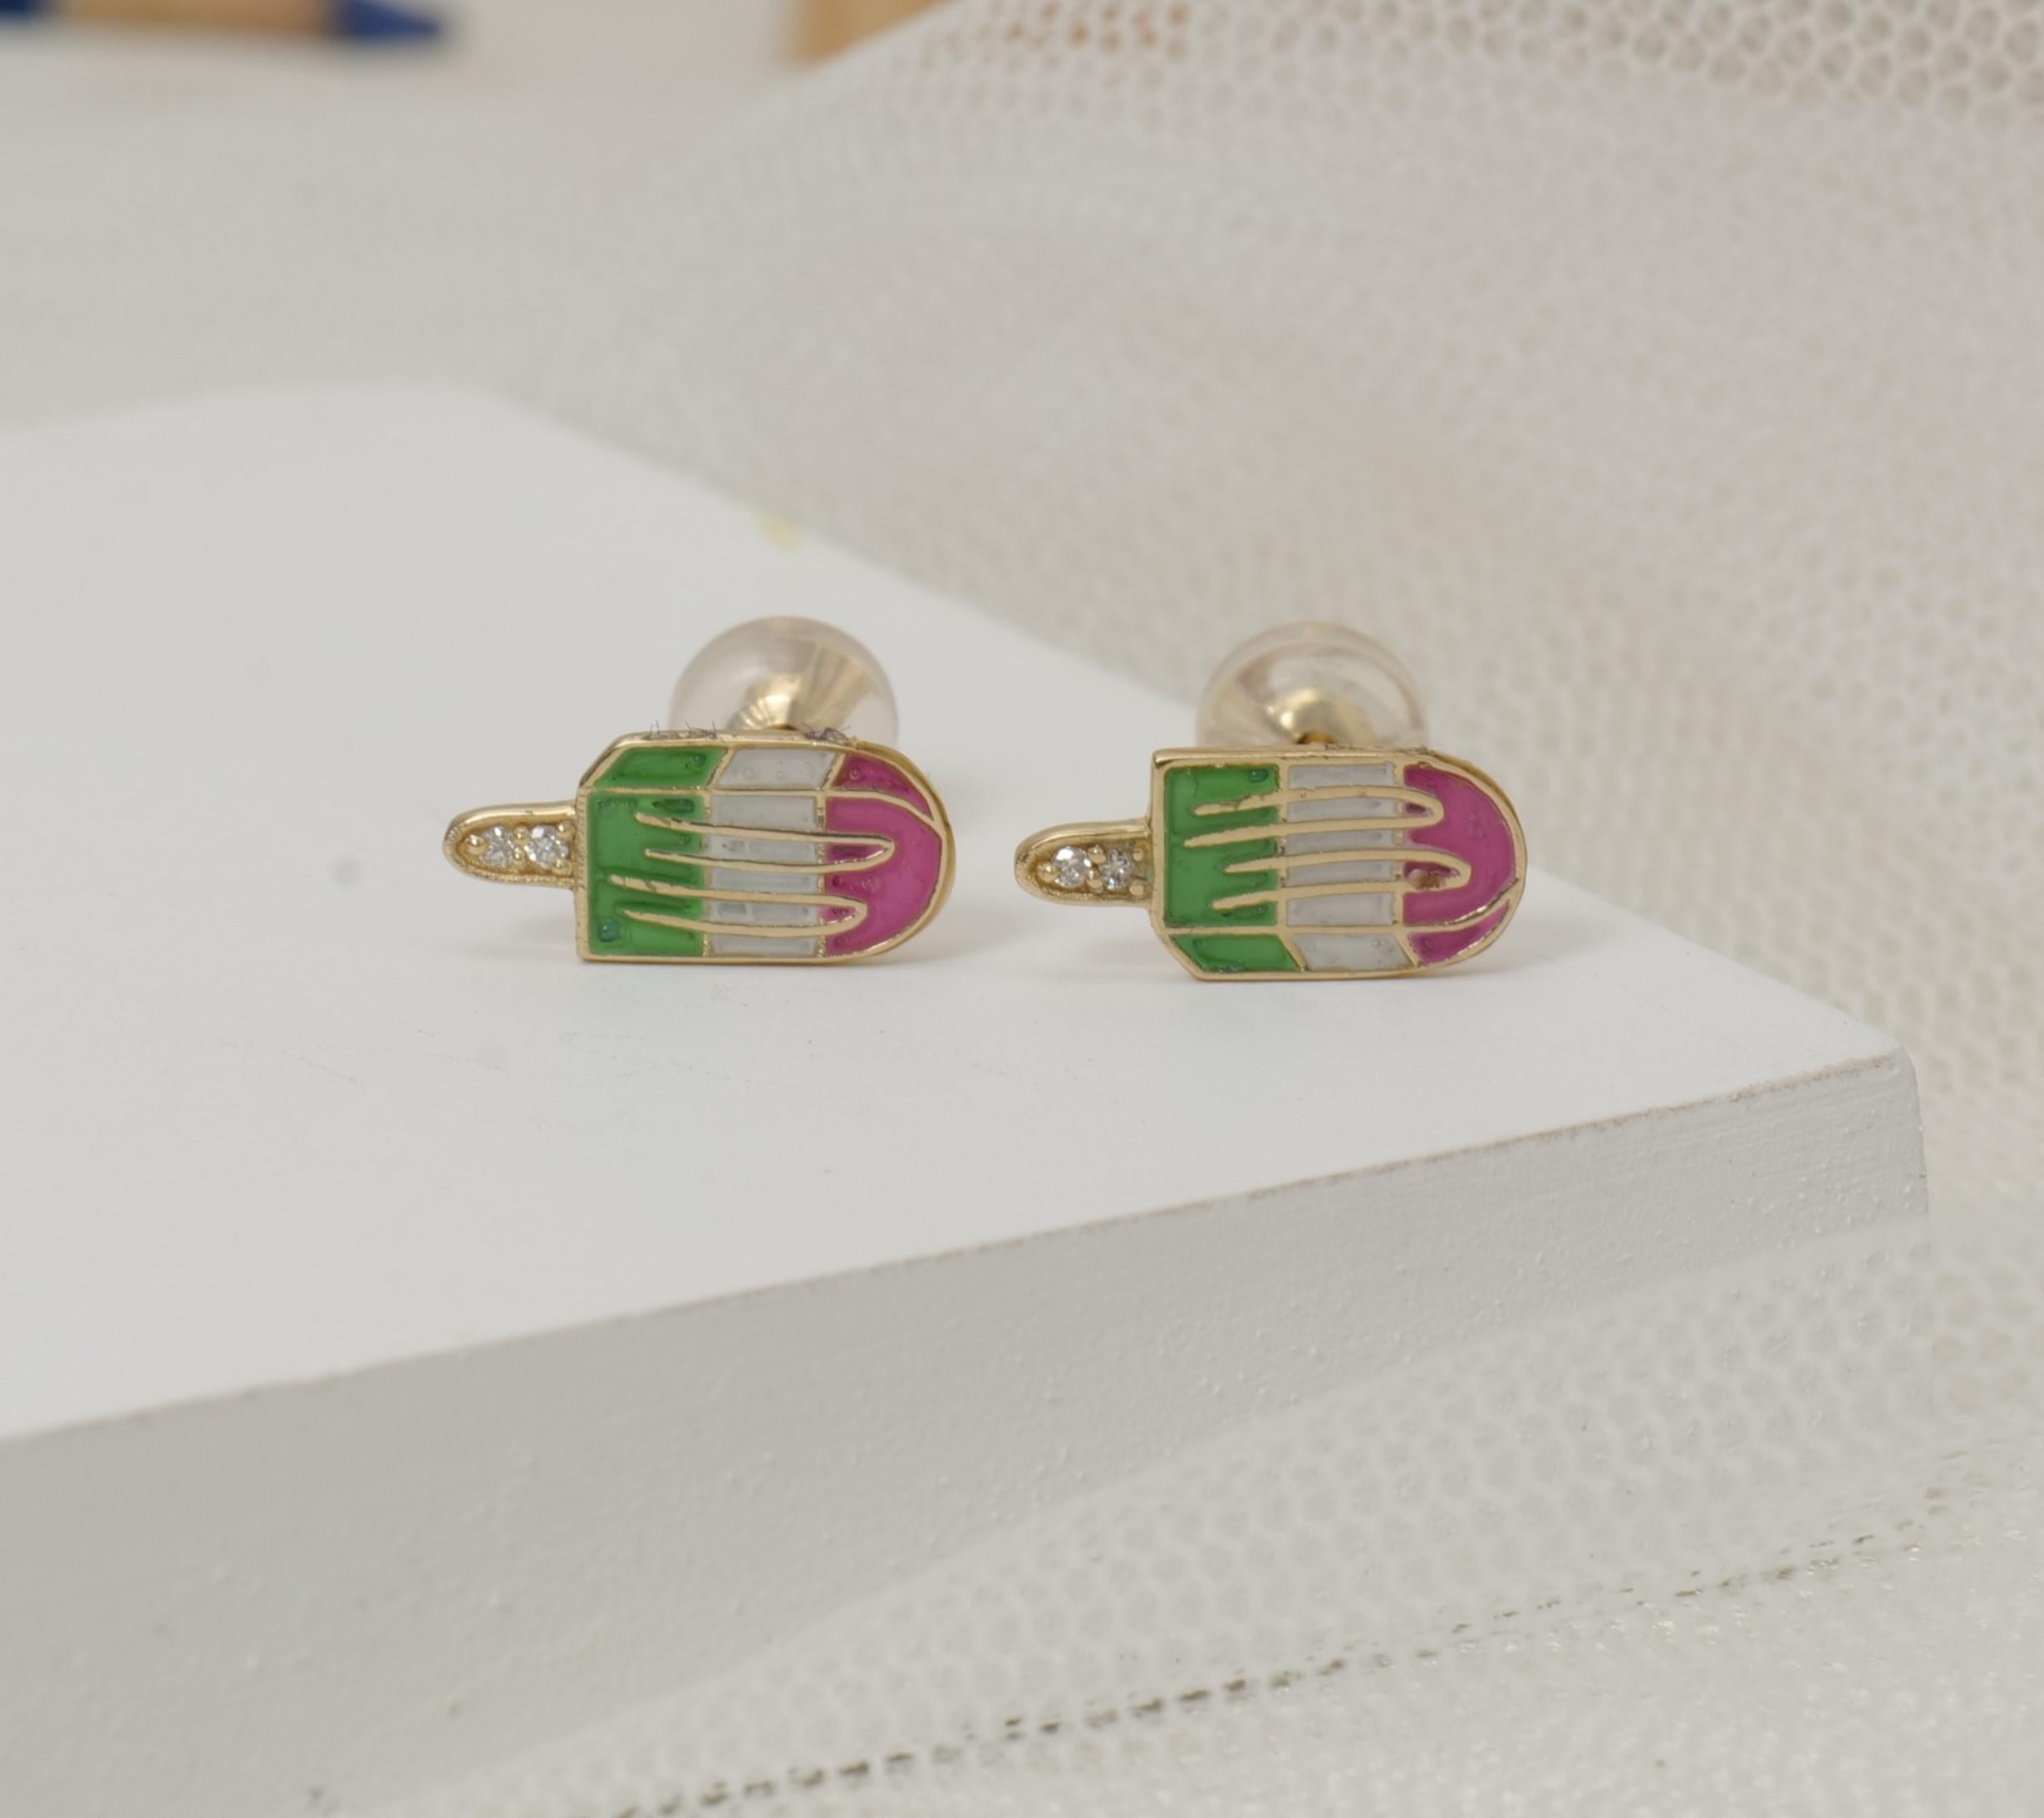 Enameled ice cream diamond earrings for girls, kids, and toddlers in 18K solid gold bring a whimsical and sweet touch to little ears. Crafted with precision, these adorable earrings showcase a playful ice cream cone design with vibrant enamel